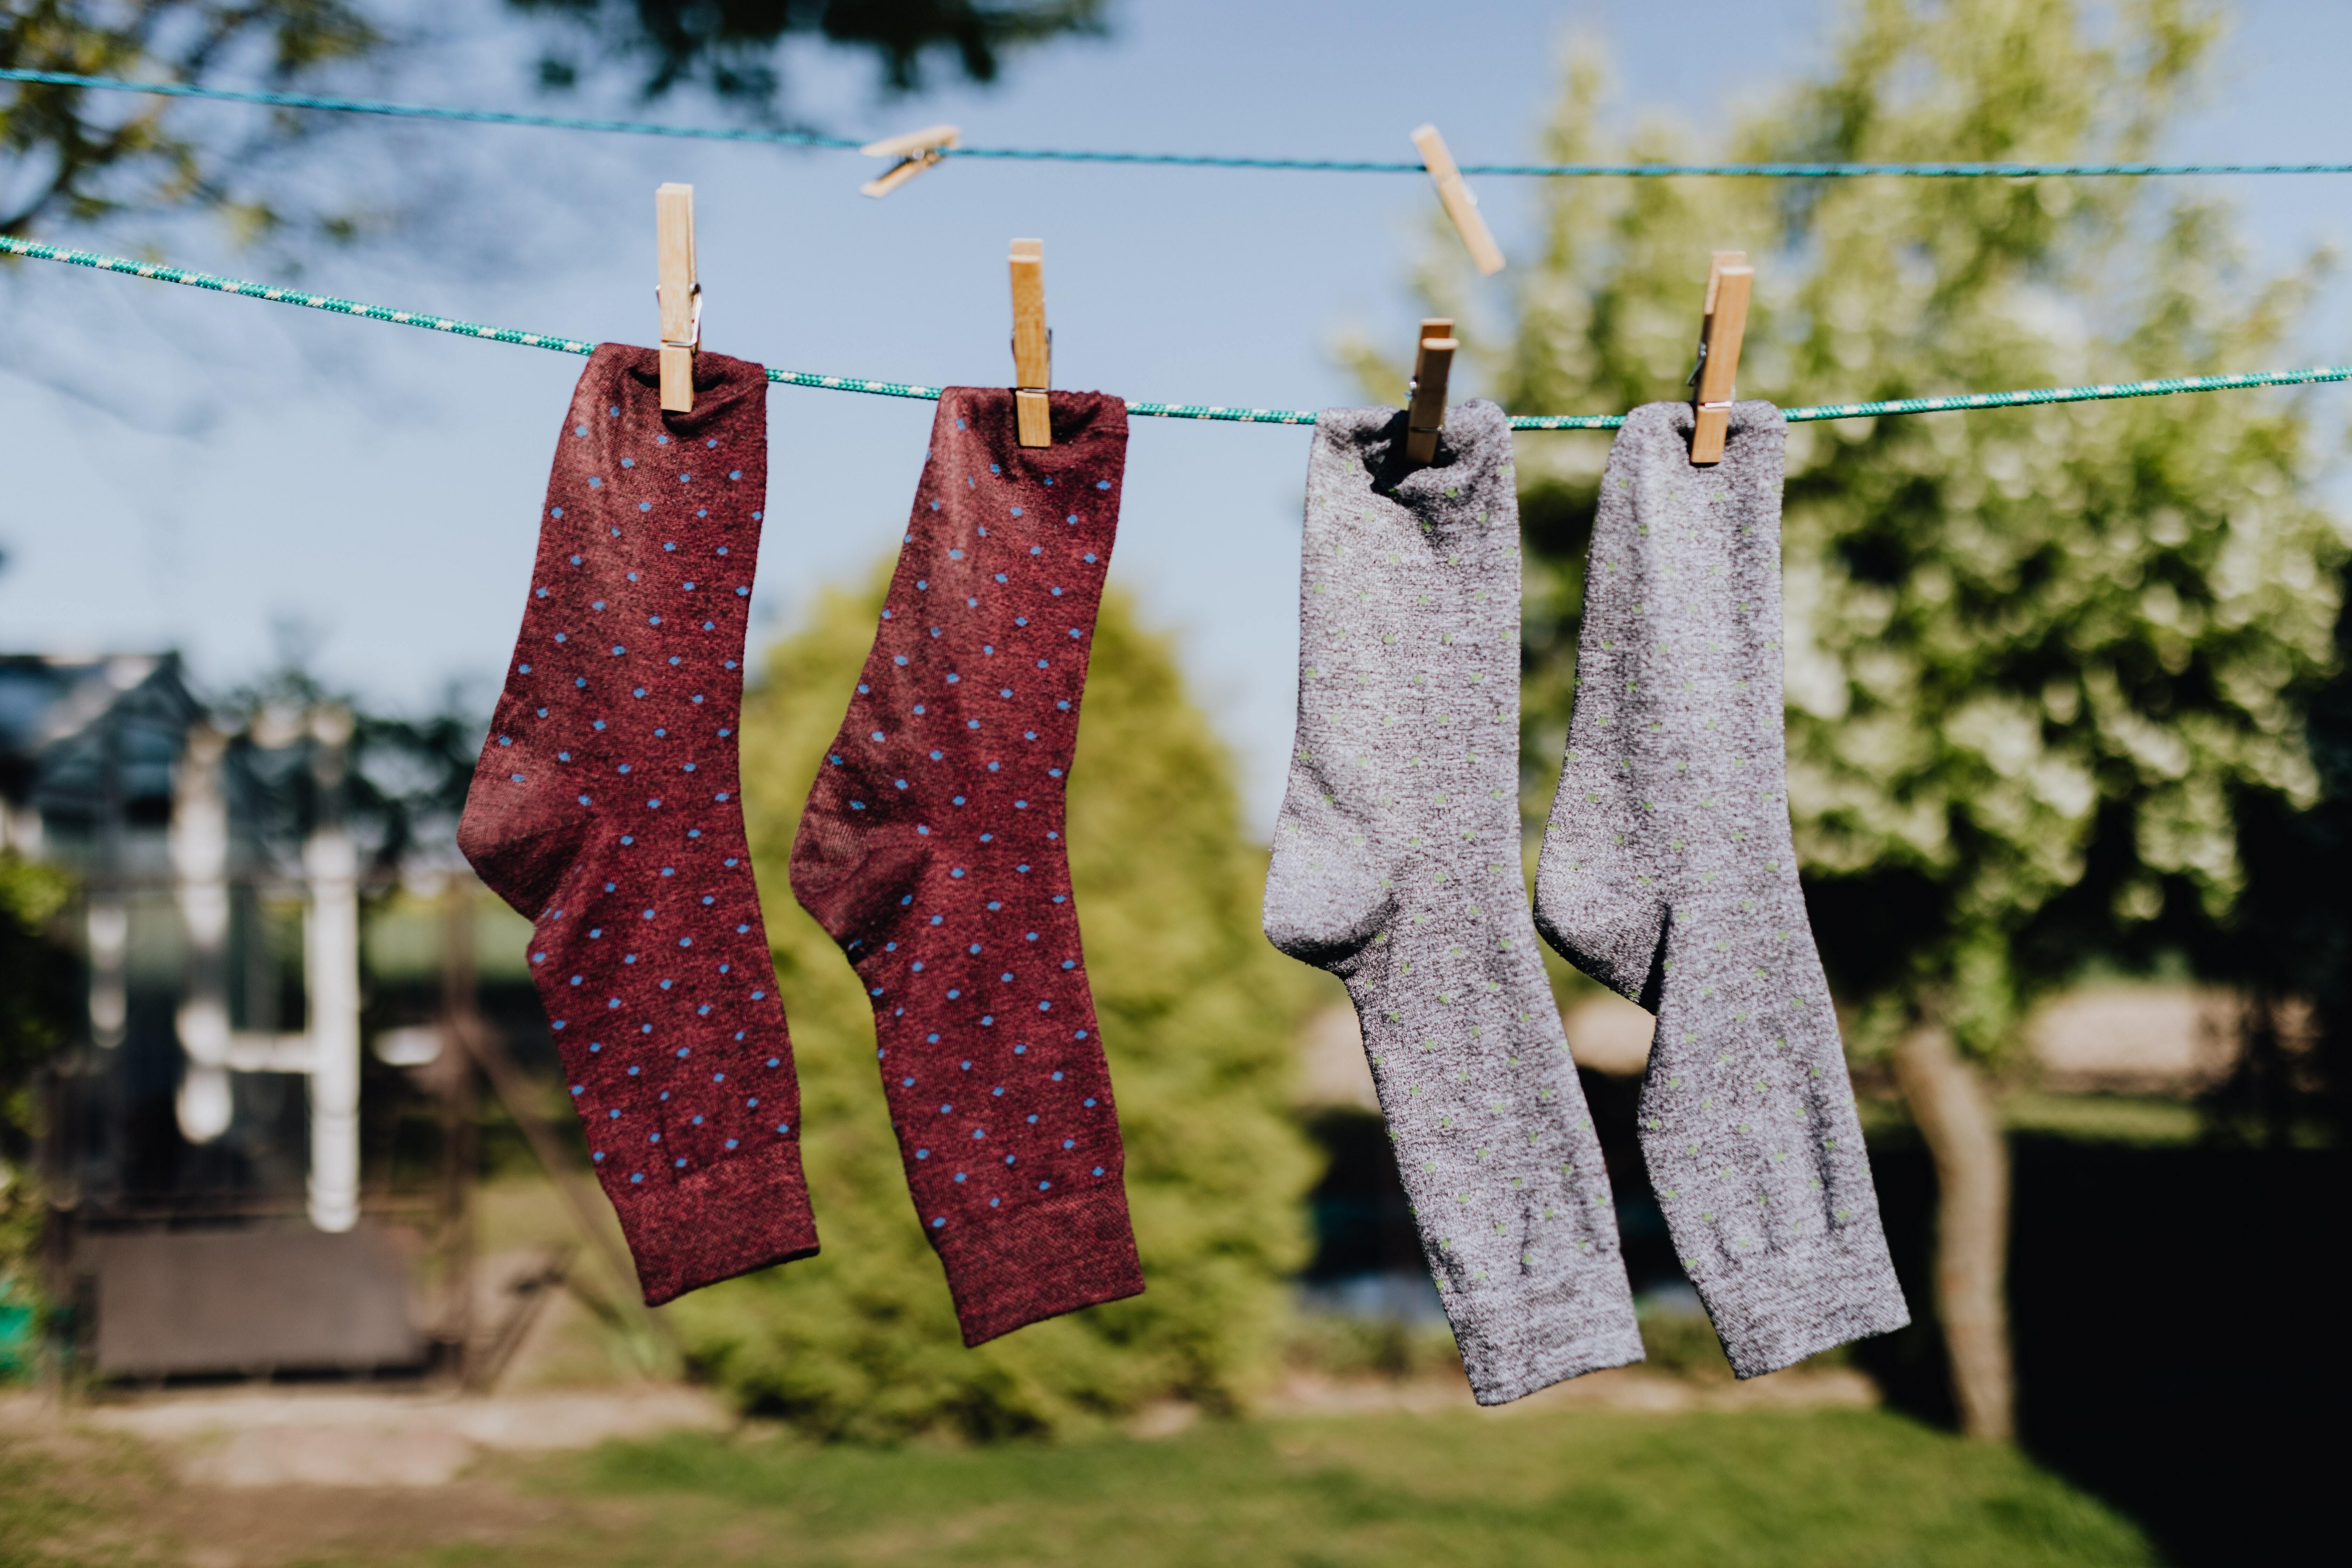 Socks on a clothes line